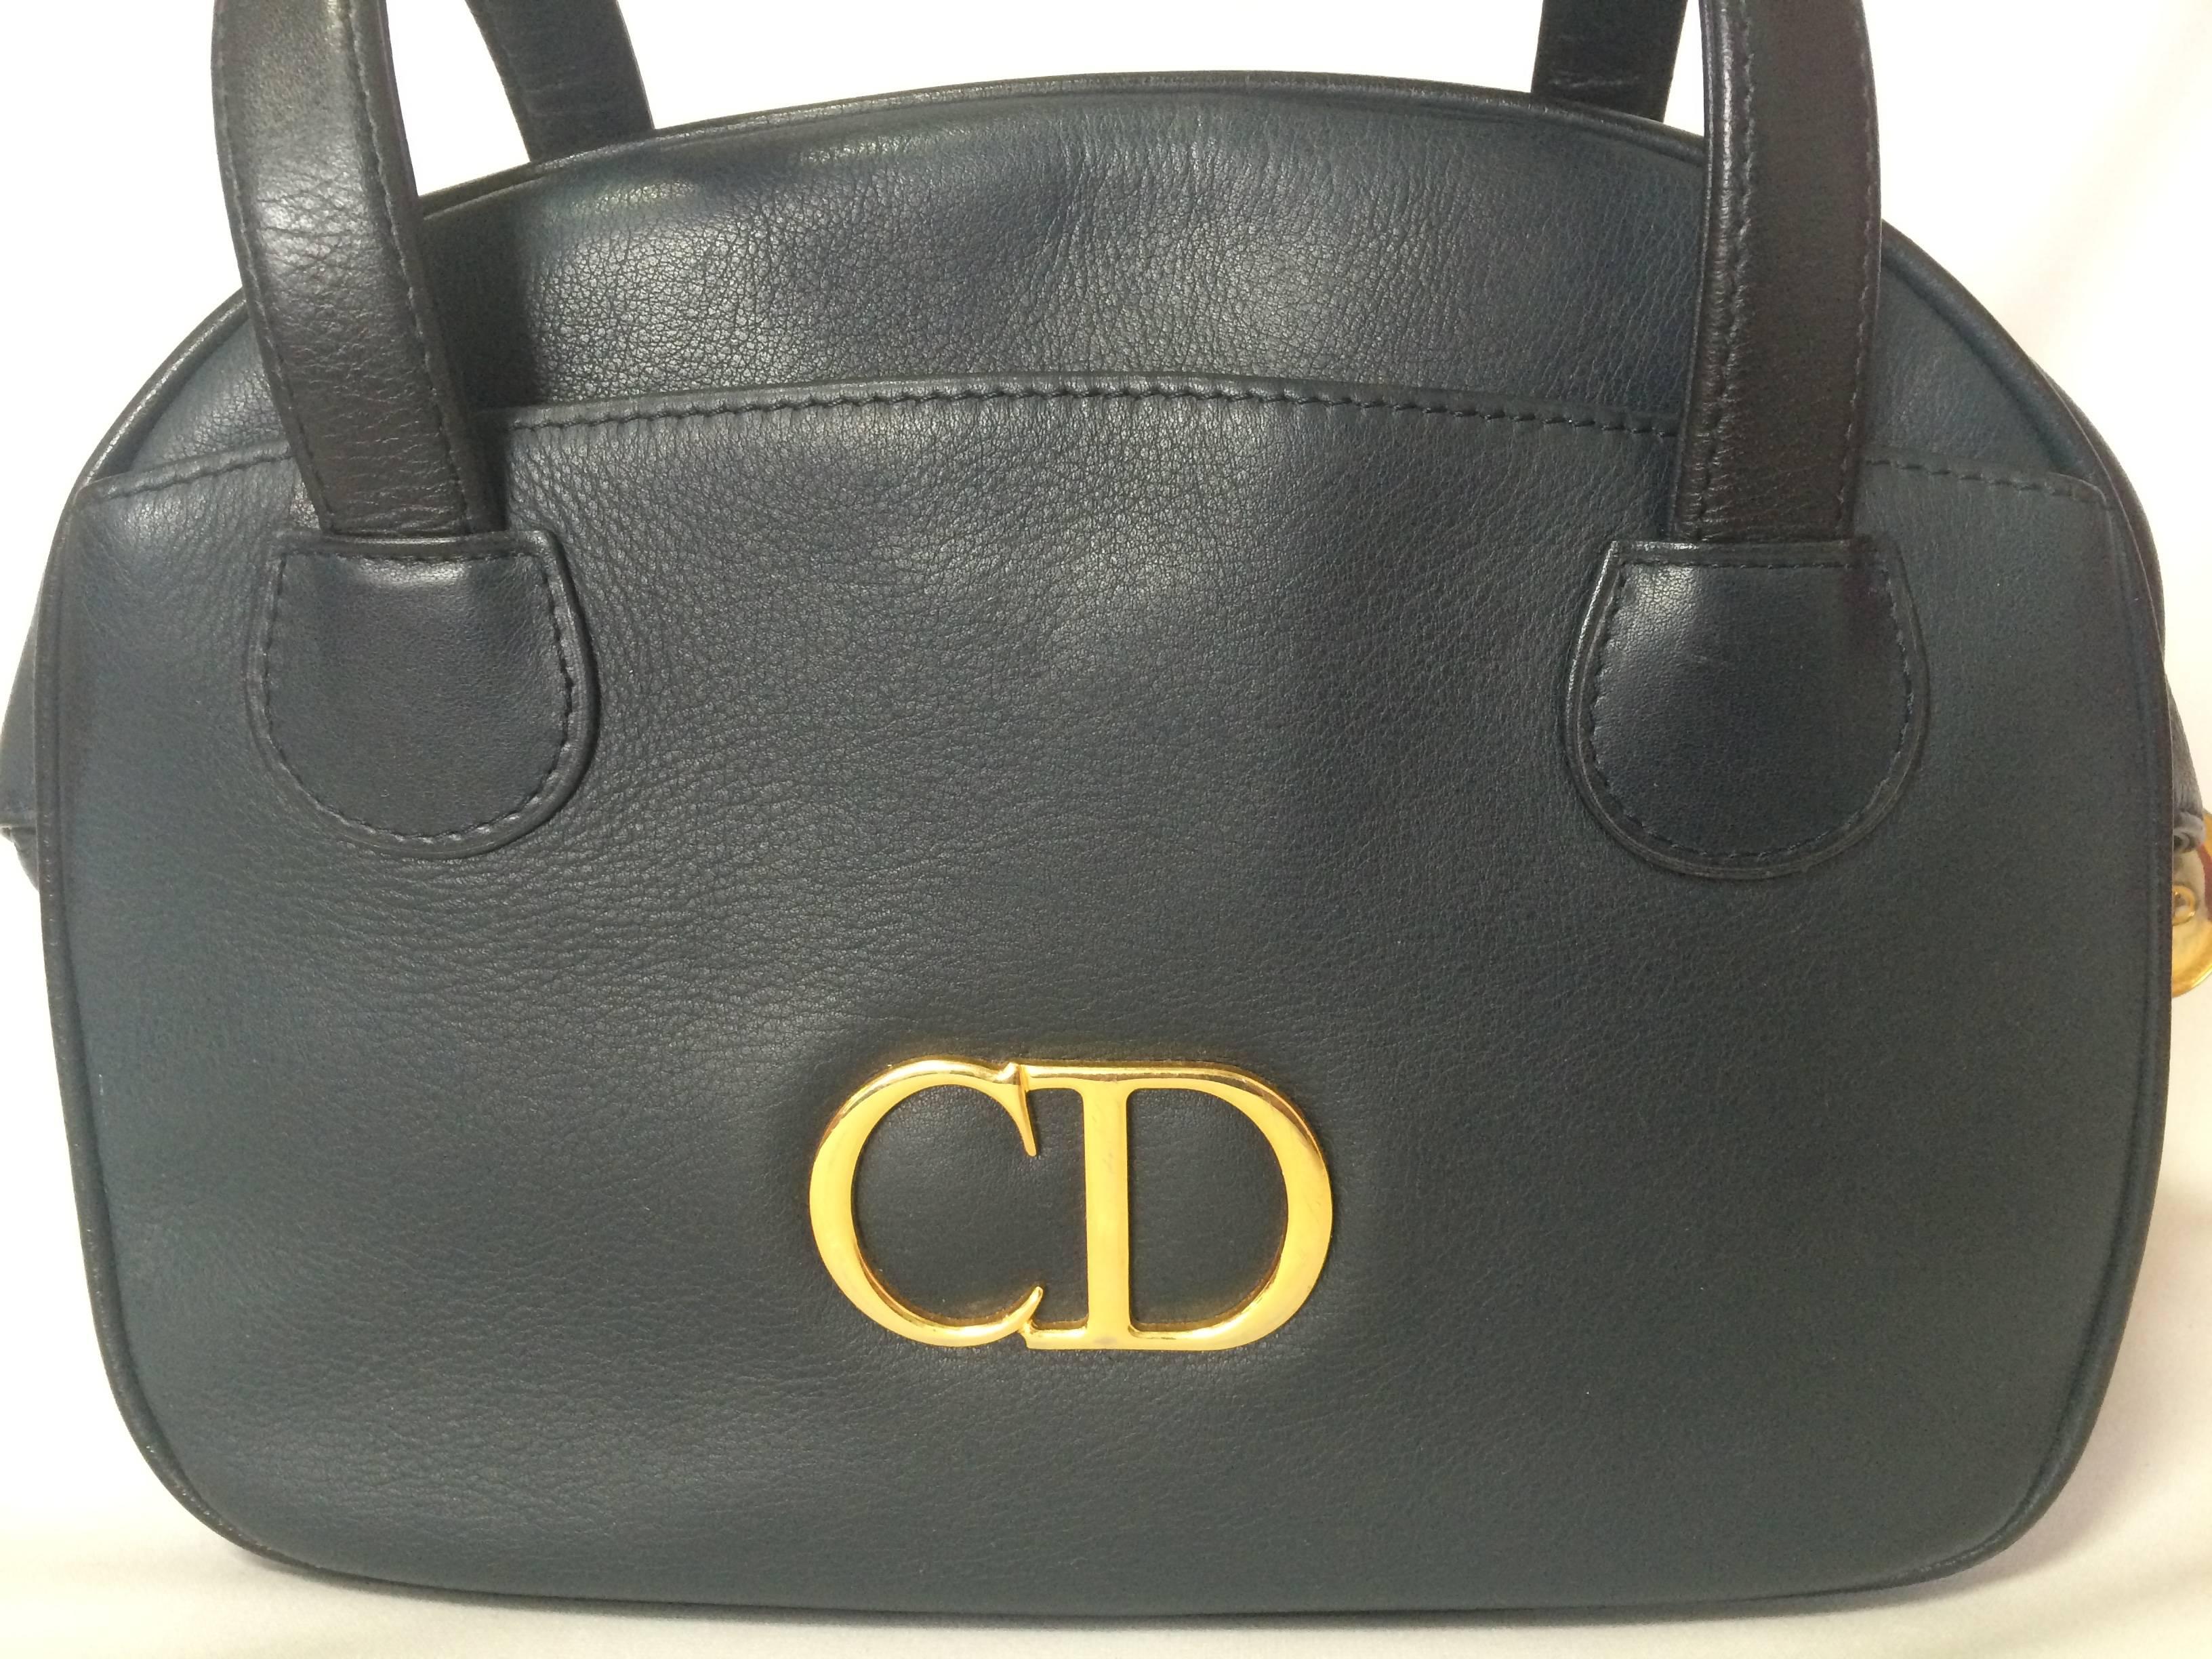 1990s. Vintage Christian Dior navy leather bolide style handbag with golden large CD logo. Classic style but rare design. Daily use.

Introducing another adorable vintage purse from Christian Dior back in the 90s.
If you are looking for a unique